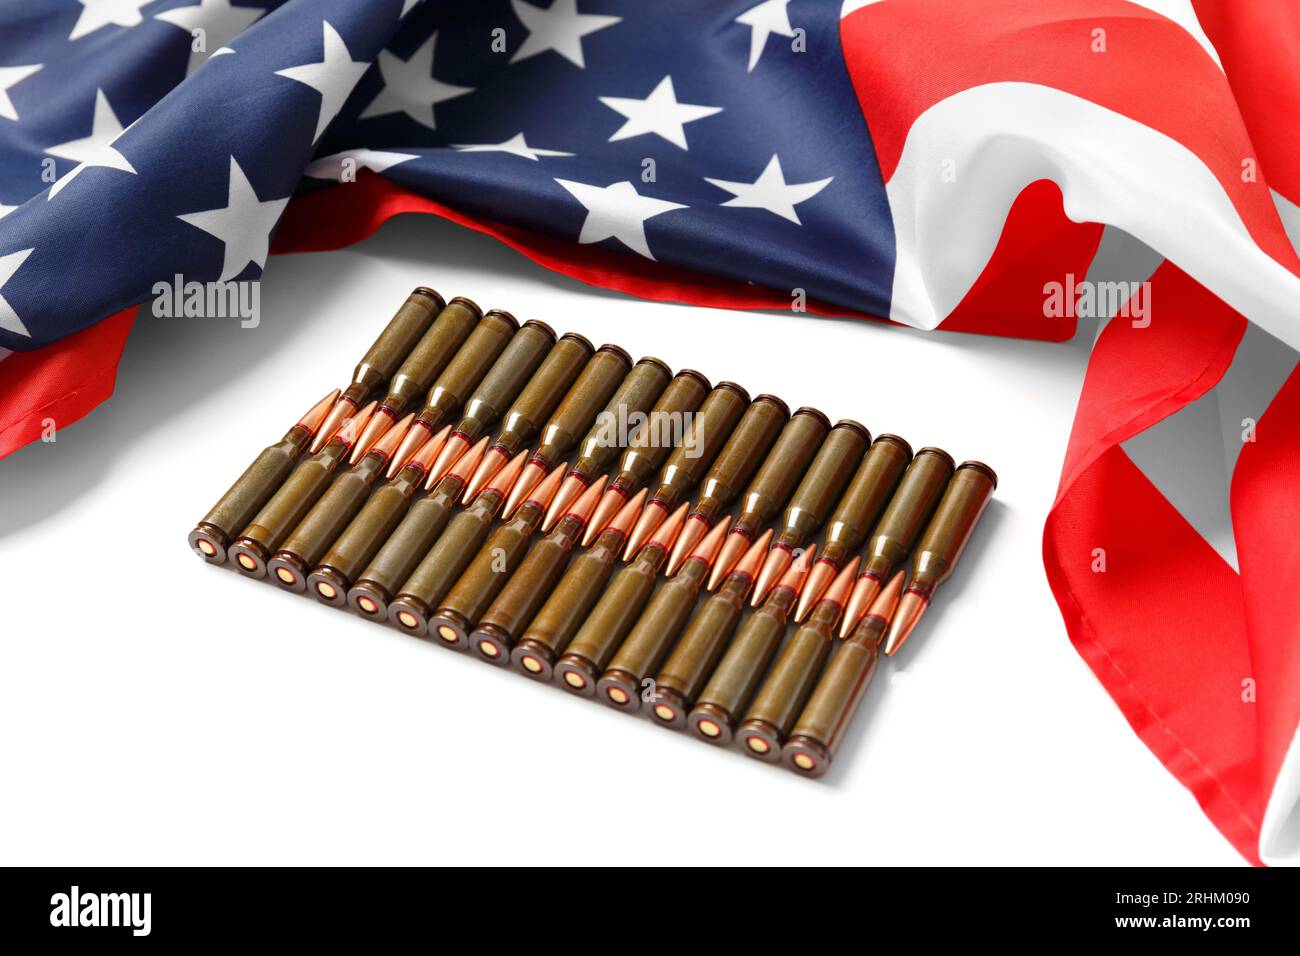 American flag, bullets, ammunition, cartridges for firearms on a white background. The concept of lend-lease, support, arms sales. Stock Photo